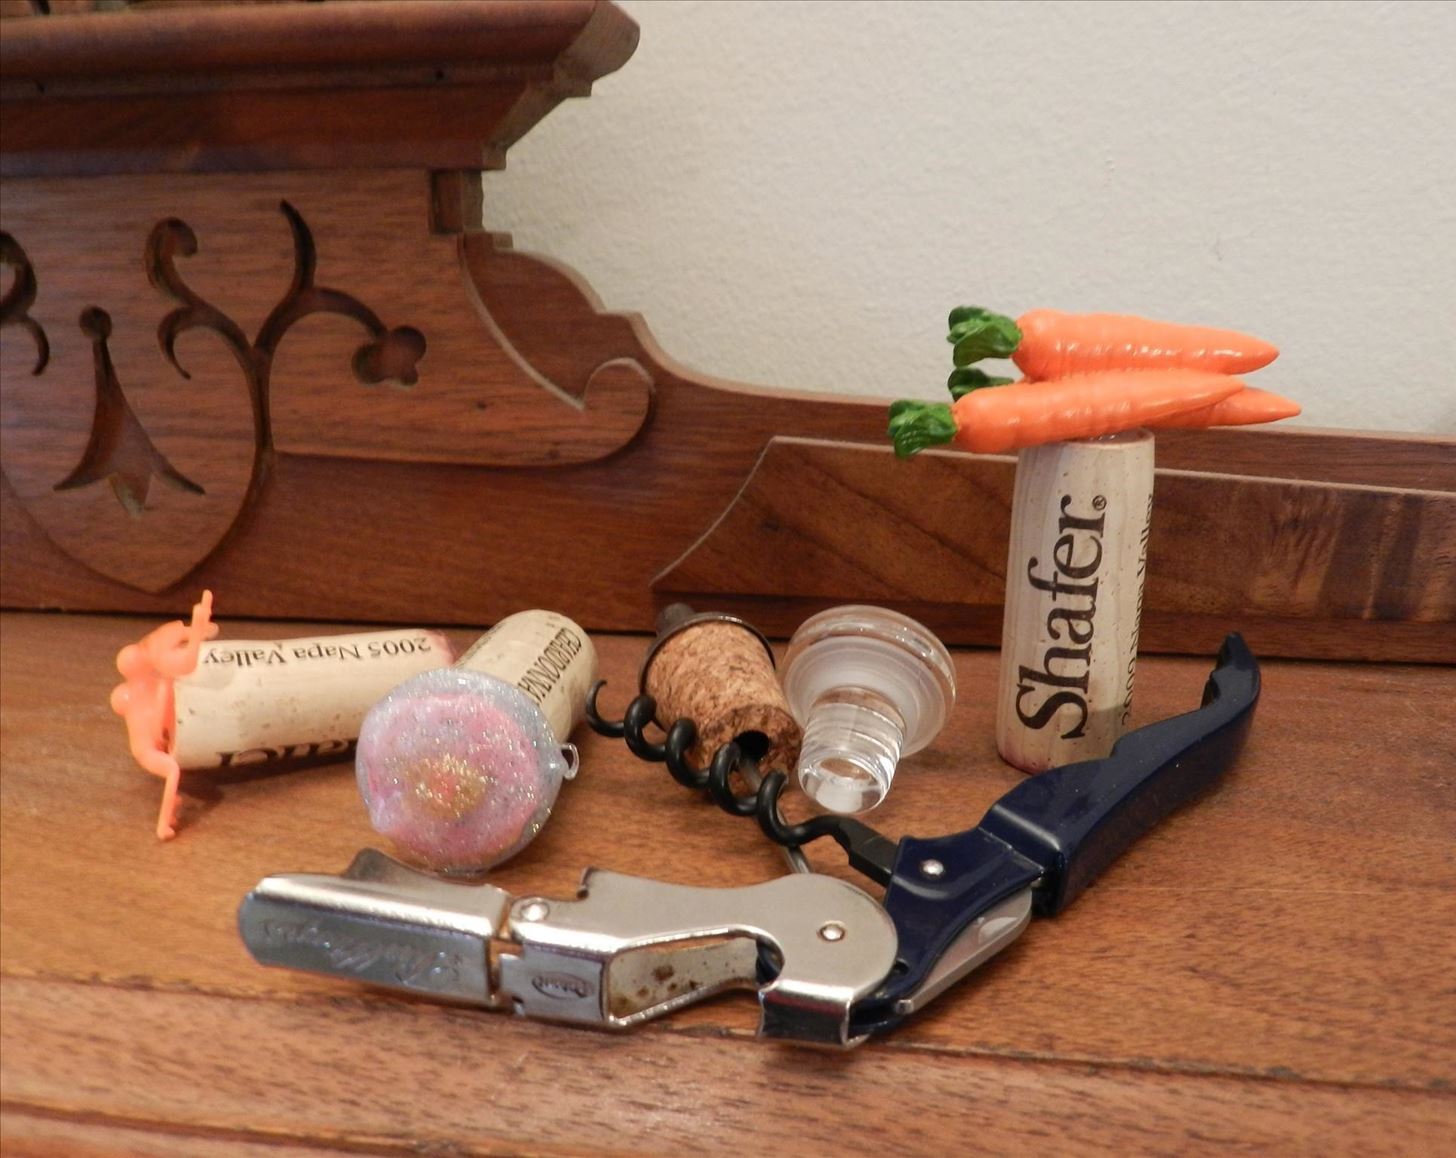 9 Creative Uses for All Those Holiday Wine Corks